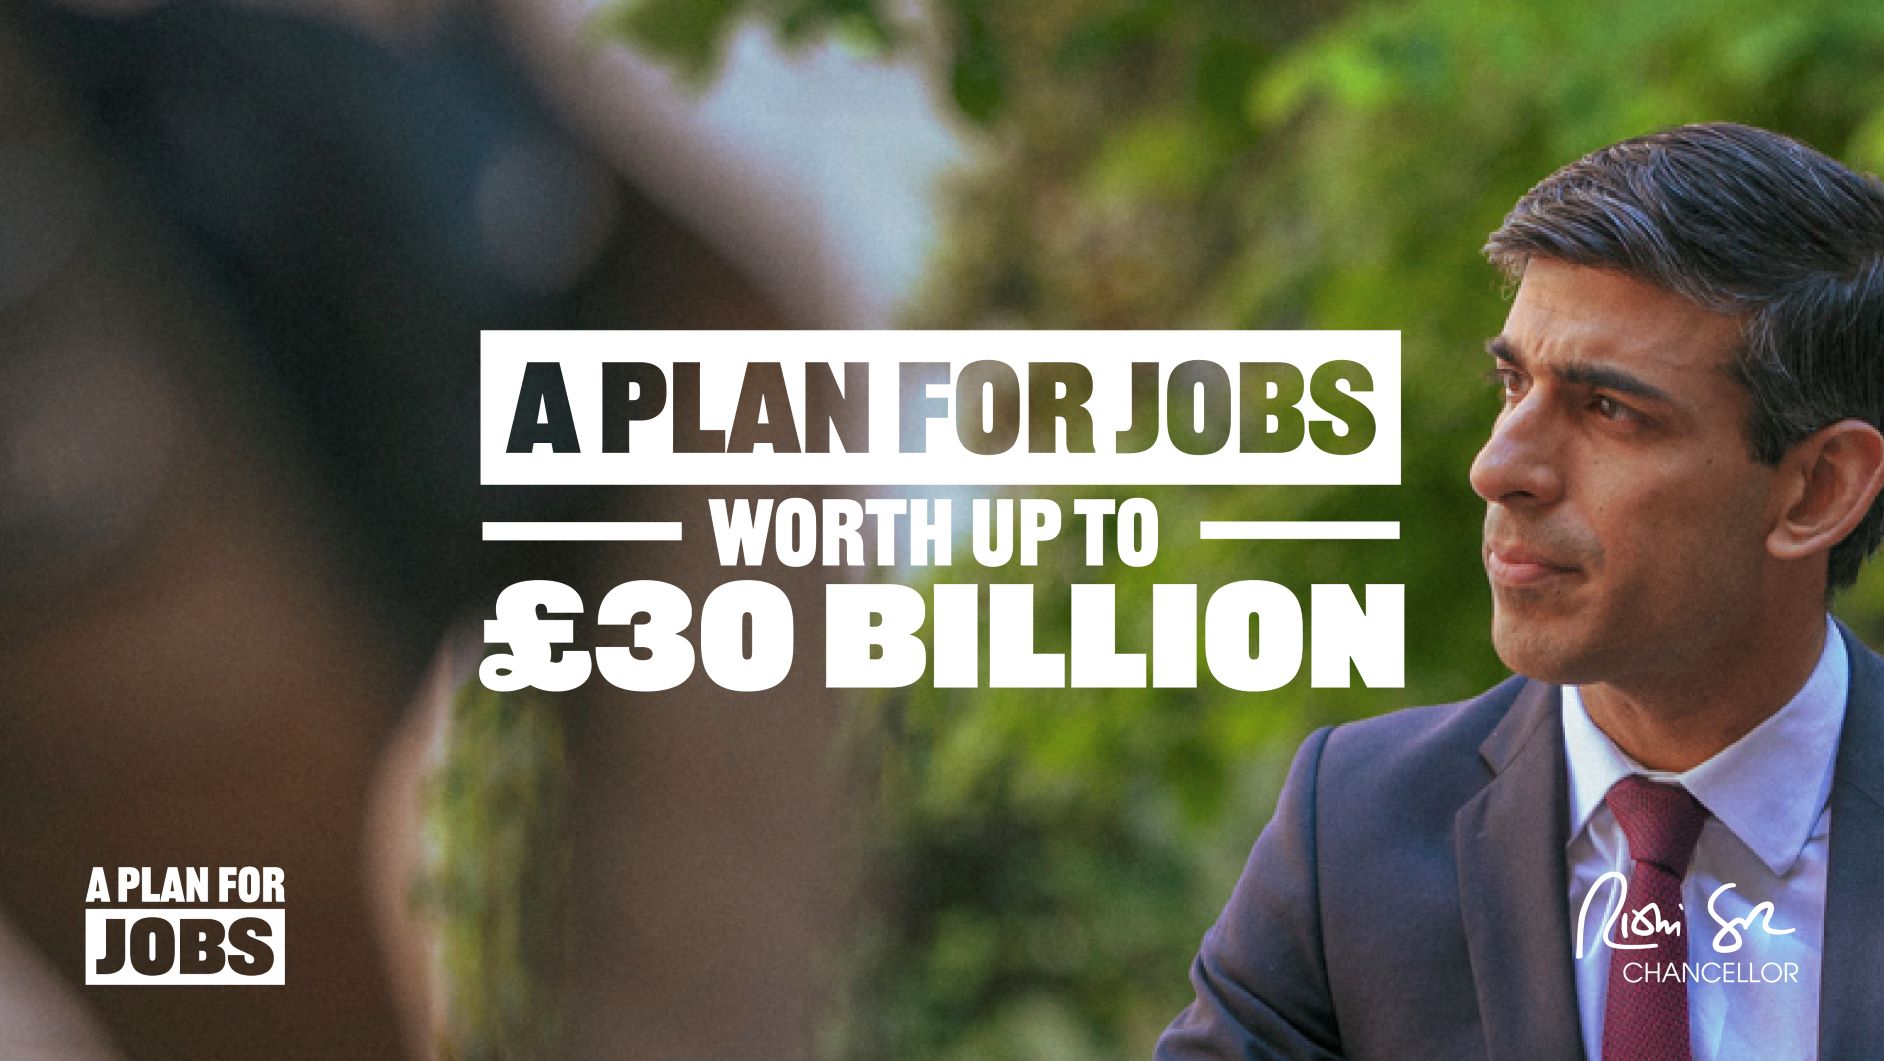 Chancellor’s Plan for Jobs to help the UK’s recovery